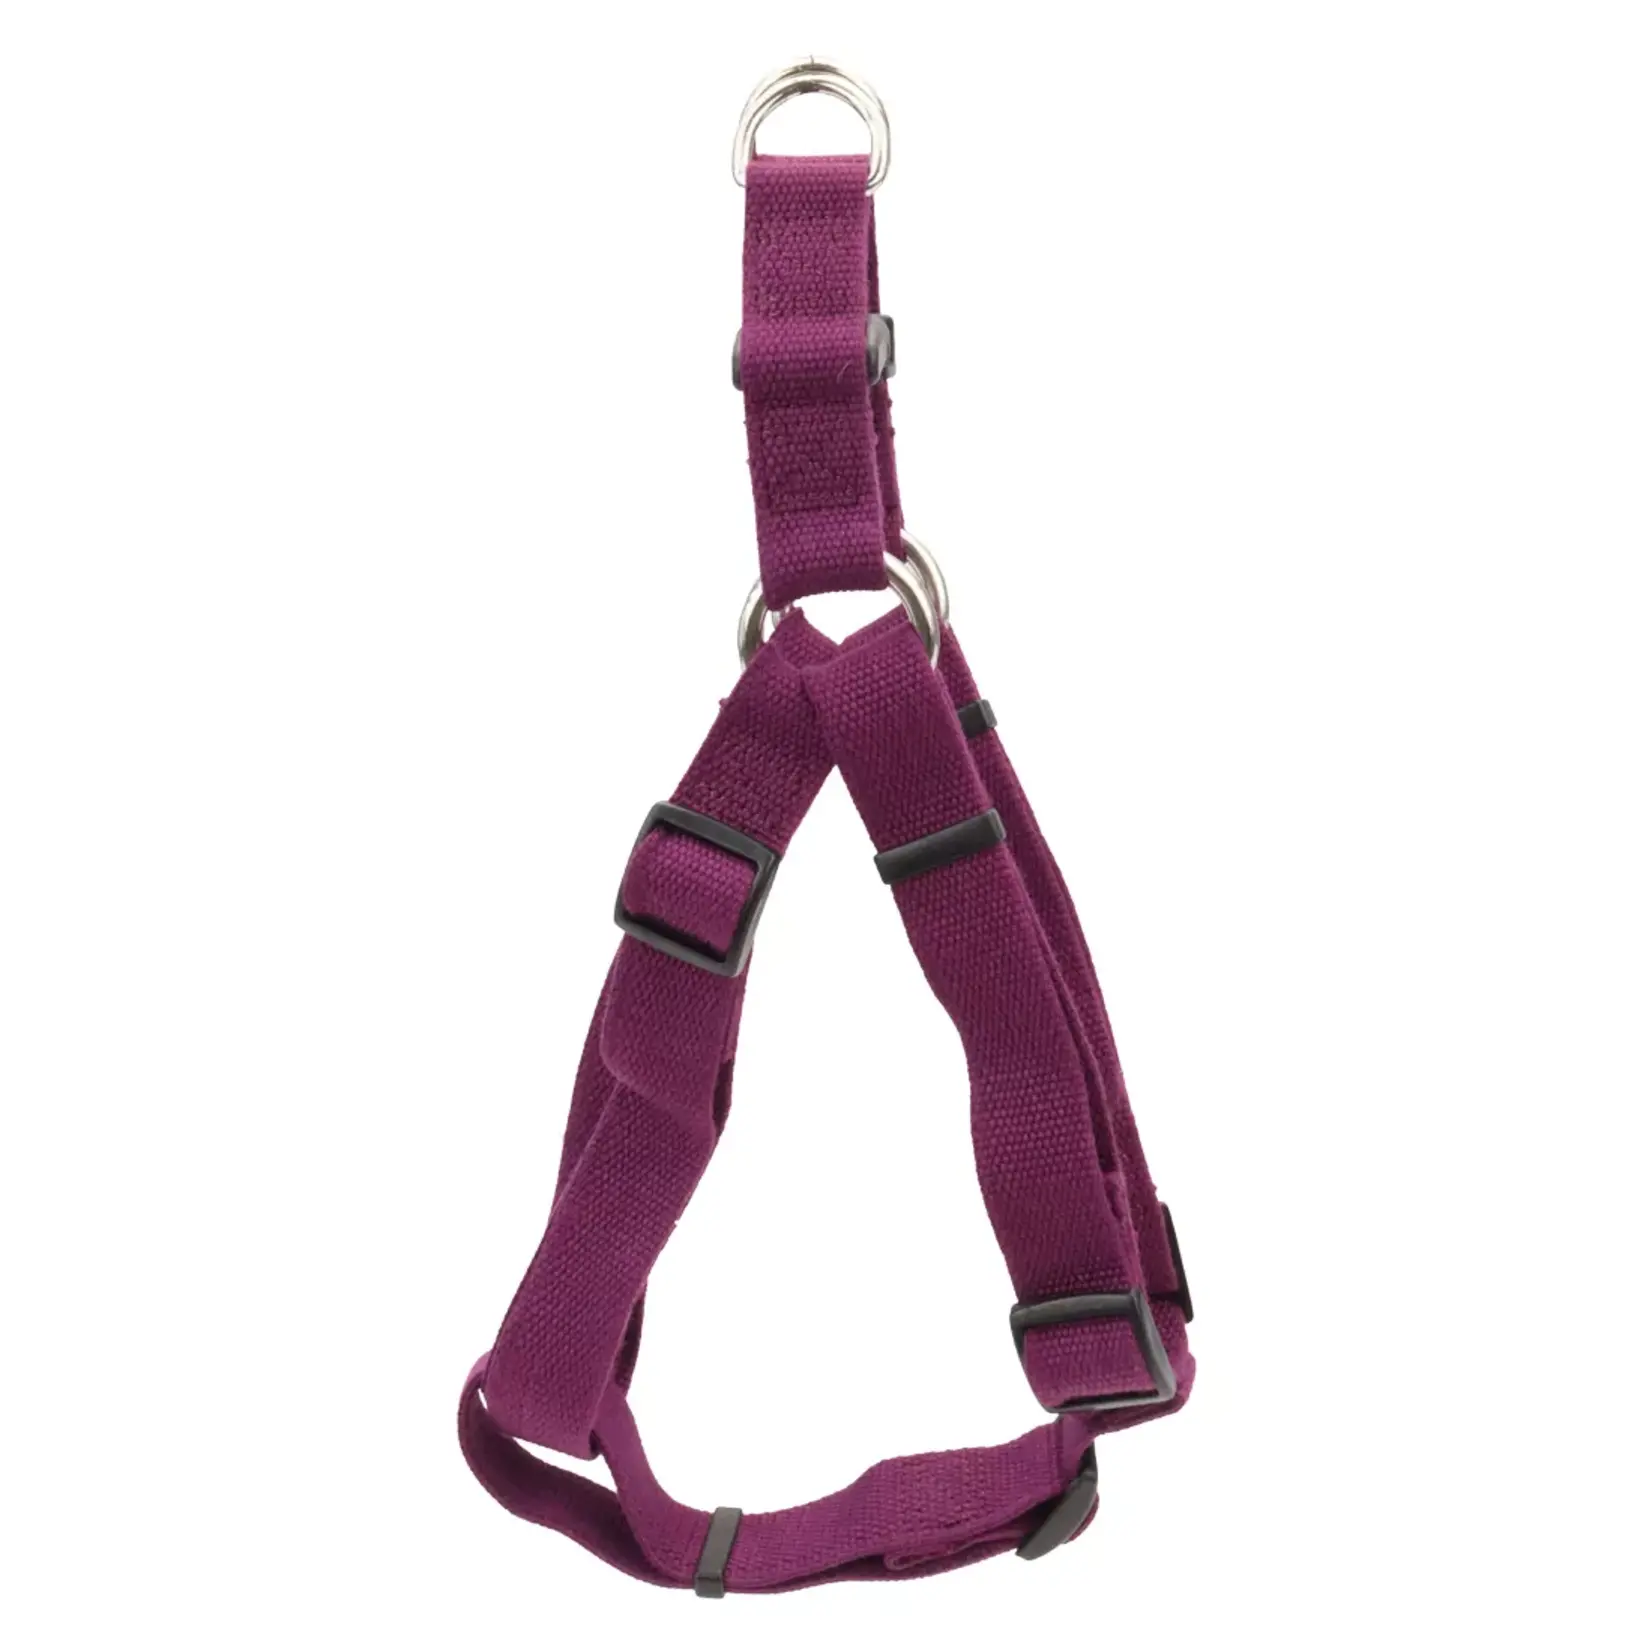 Coastal Pet Products New Earth Soy Comfort Wrap Adjustable Dog Harness